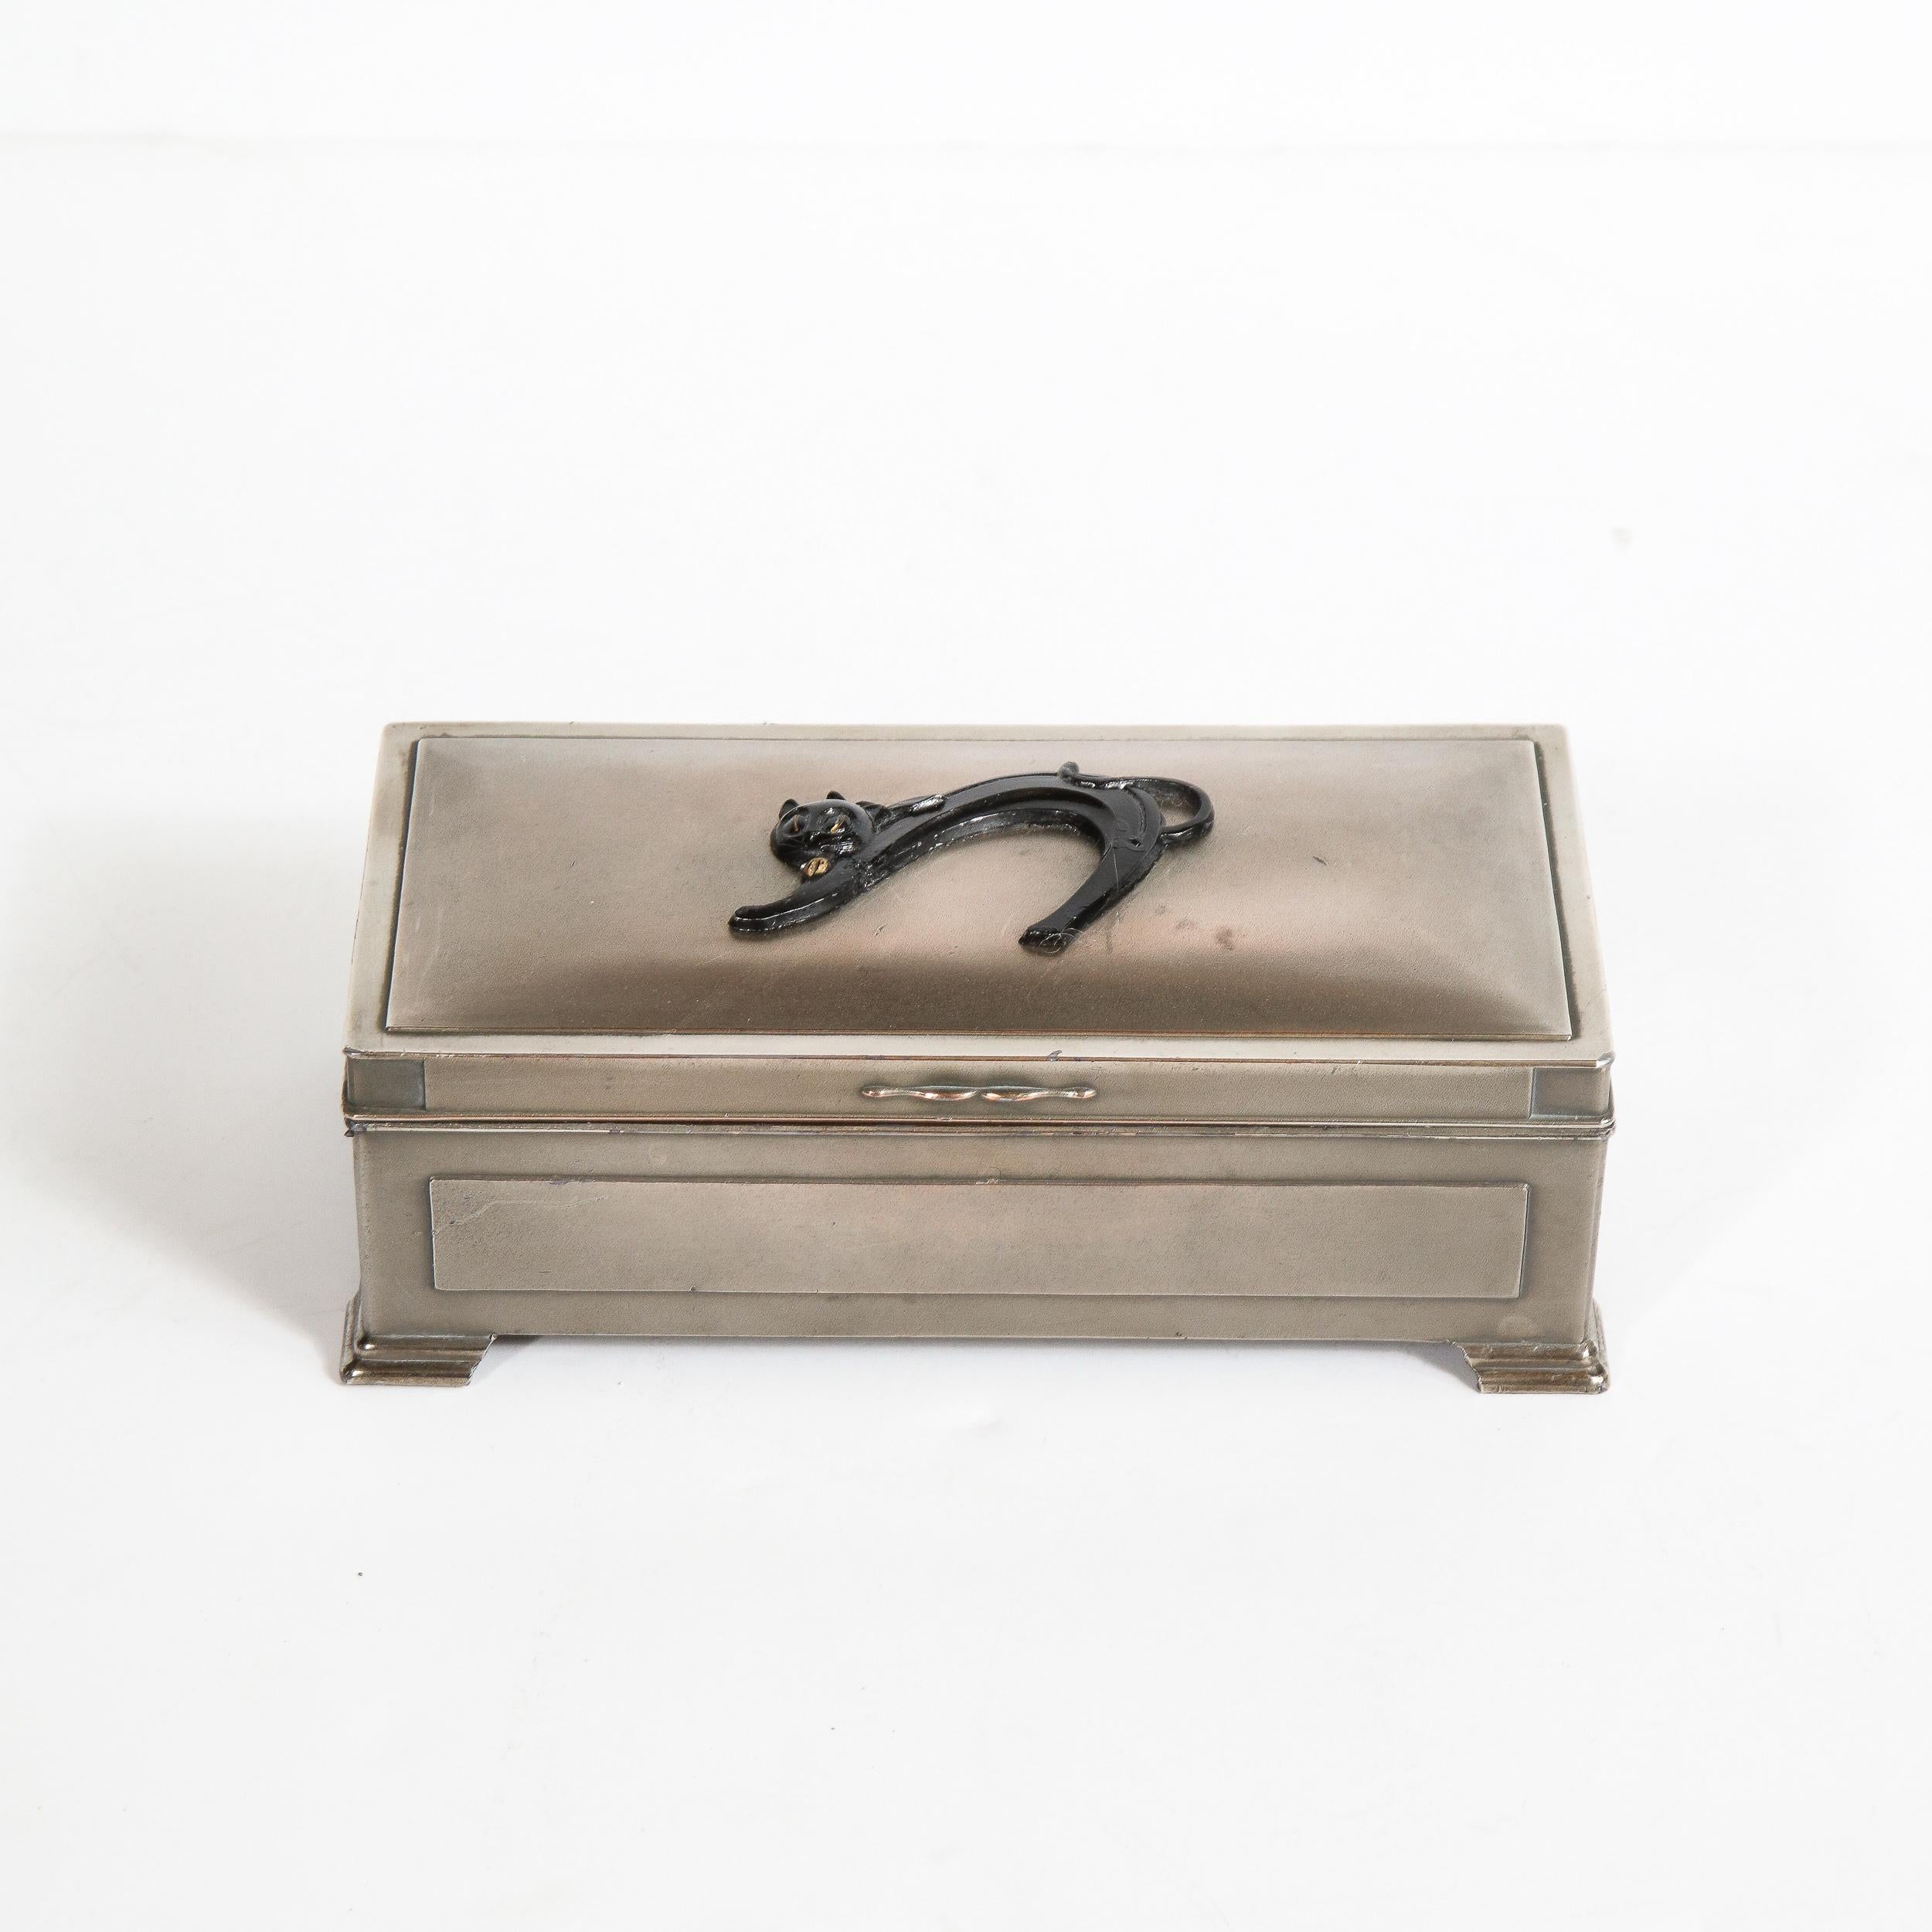 This refined Art Deco pewter box was realized in Japan, circa 1935. It features a volumetric rectangular body with skyscraper style feet; an undulating streamlined handle; and a stylized cat motif in enamel relief adorning the top. Additionally,